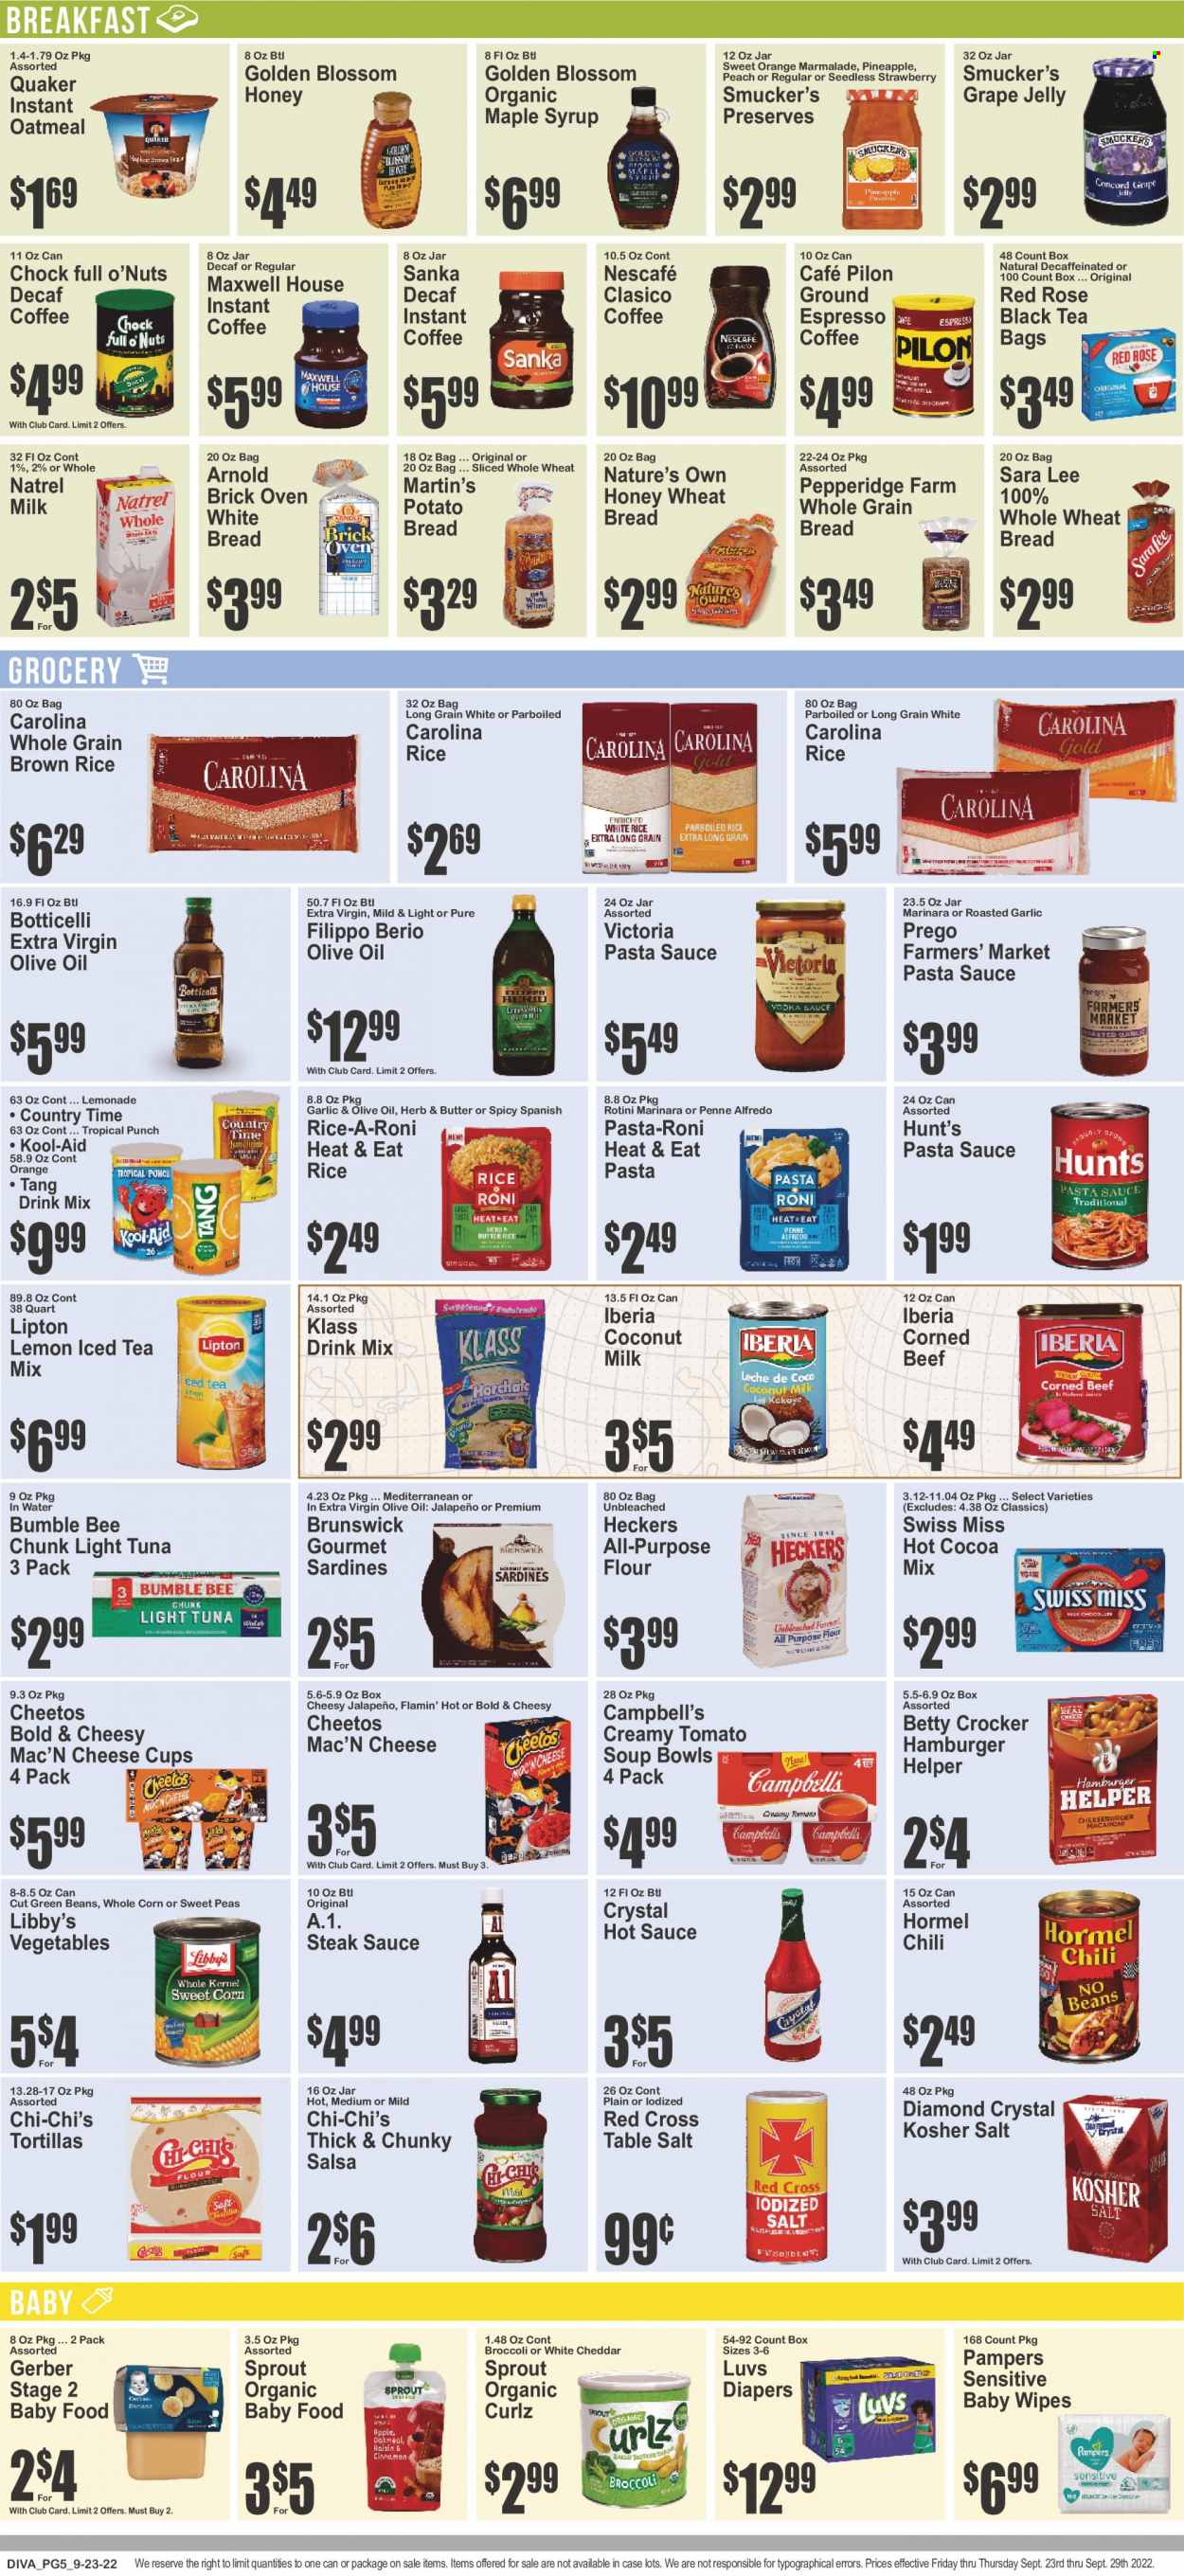 thumbnail - Key Food Flyer - 09/23/2022 - 09/29/2022 - Sales products - bread, tortillas, wheat bread, Sara Lee, broccoli, corn, green beans, peas, jalapeño, sweet corn, pineapple, sardines, tuna, Campbell's, tomato soup, pasta sauce, soup, Bumble Bee, sauce, Quaker, pasta sides, Hormel, ready meal, rice sides, corned beef, cheddar, cheese cup, jelly, Swiss Miss, Gerber, Cheetos, all purpose flour, oatmeal, salt, canned tuna, coconut milk, canned vegetables, light tuna, canned fish, brown rice, white rice, penne, steak sauce, hot sauce, salsa, extra virgin olive oil, olive oil, oil, grape jelly, maple syrup, syrup, marmalade, lemonade, Lipton, Country Time, fruit punch, powder drink, hot cocoa, Maxwell House, tea bags, coffee, instant coffee, Nescafé, organic baby food, wipes, Pampers, baby wipes, nappies, Nature's Own. Page 6.